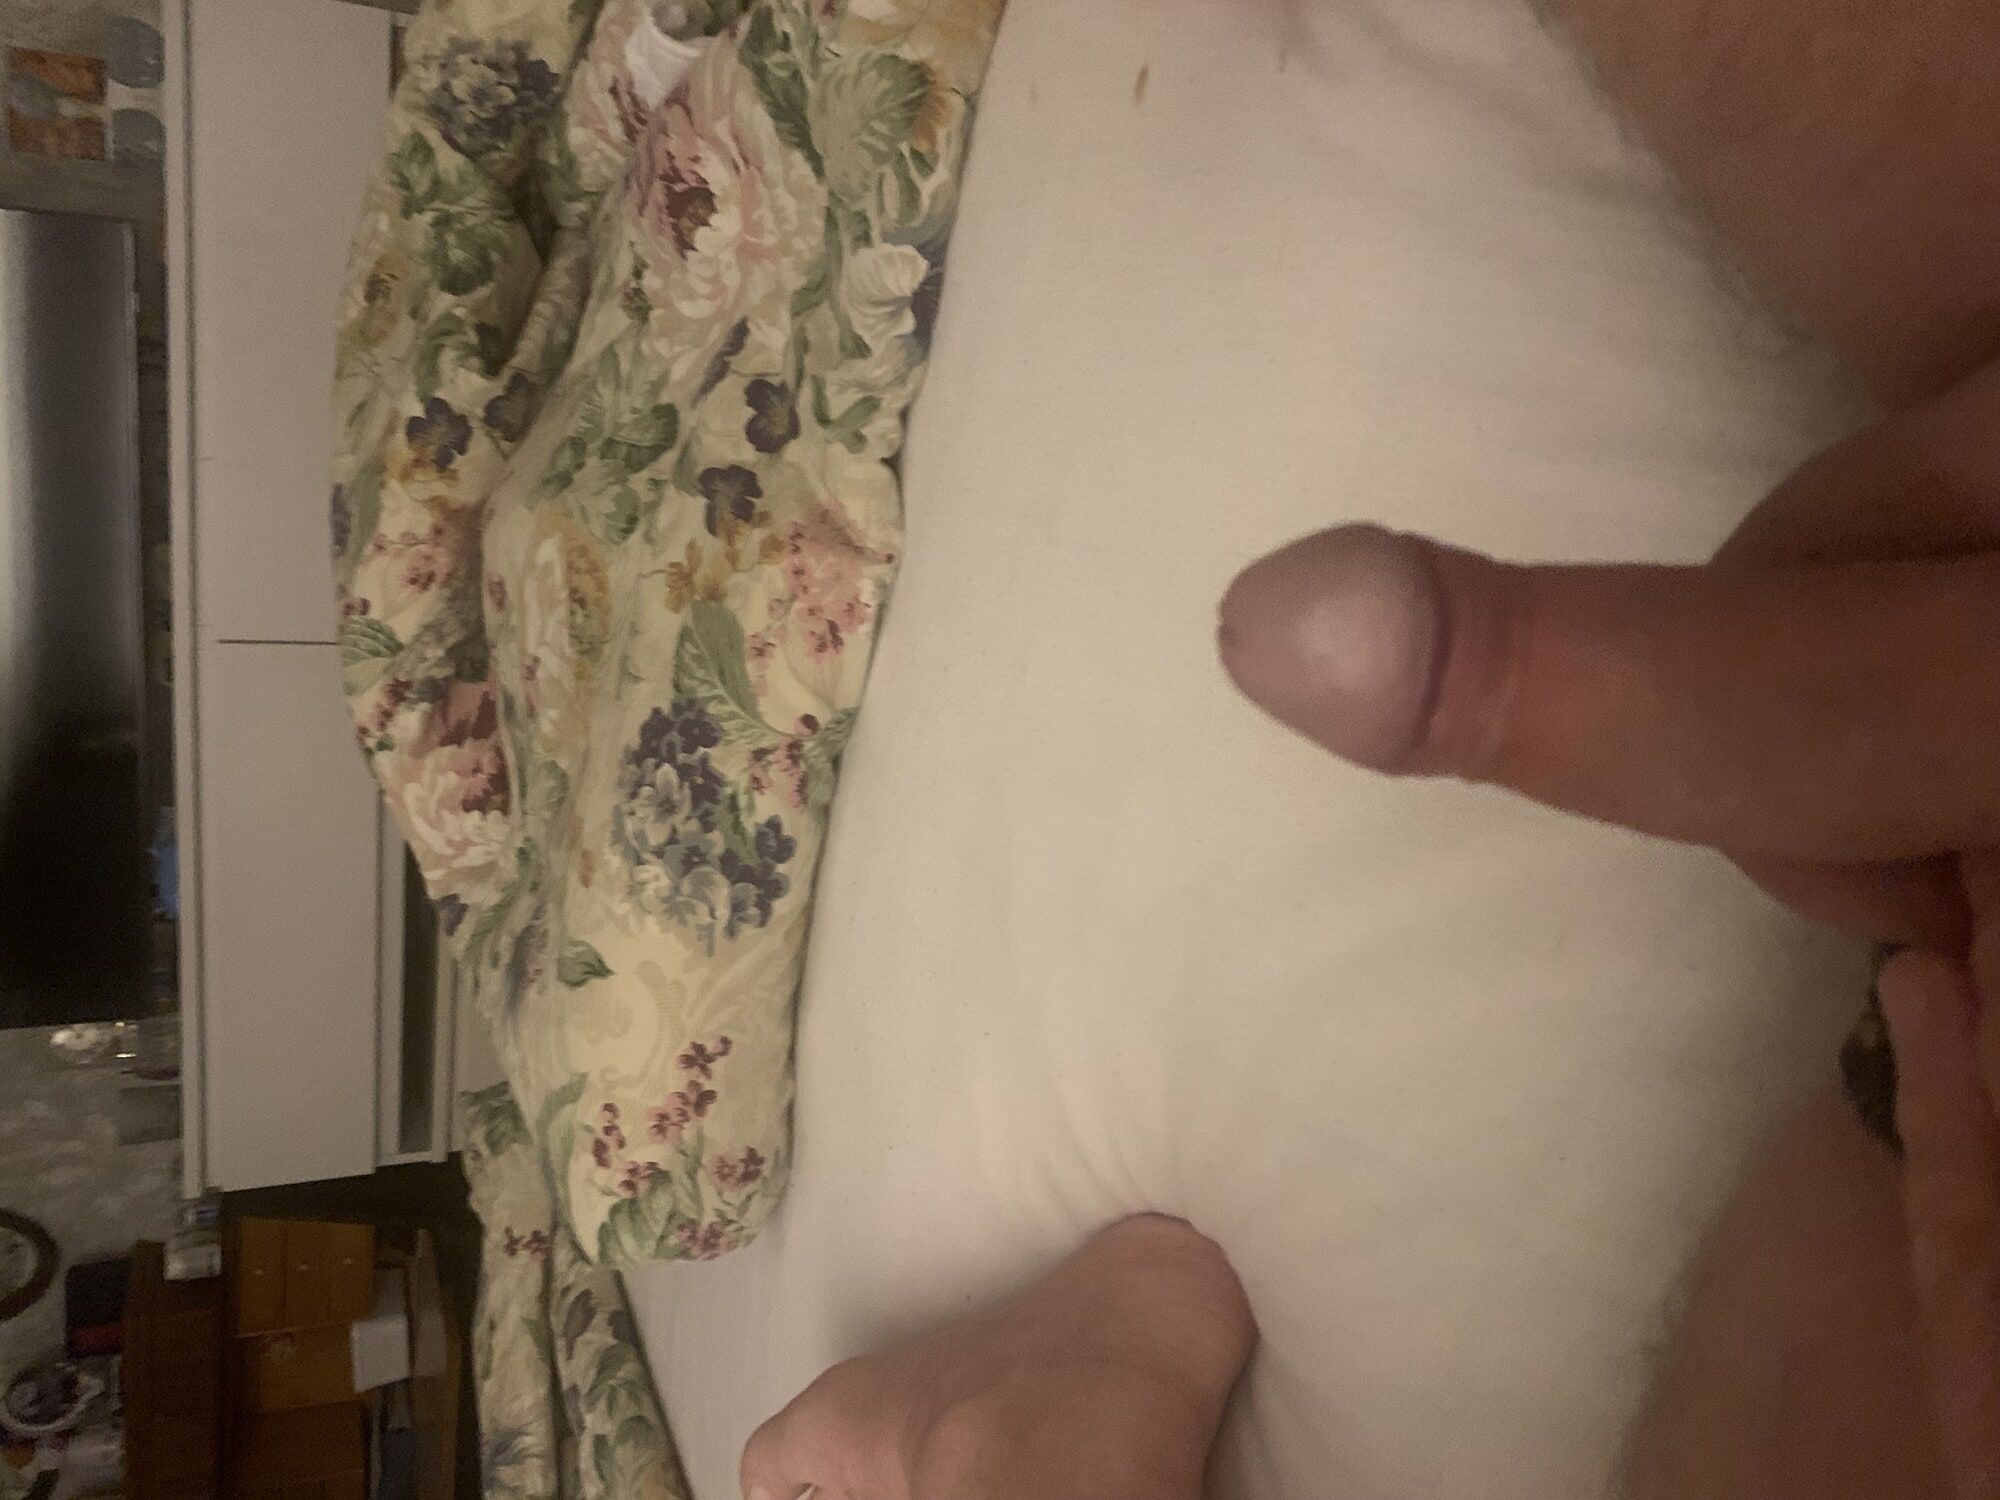 pictures of my little cock #6